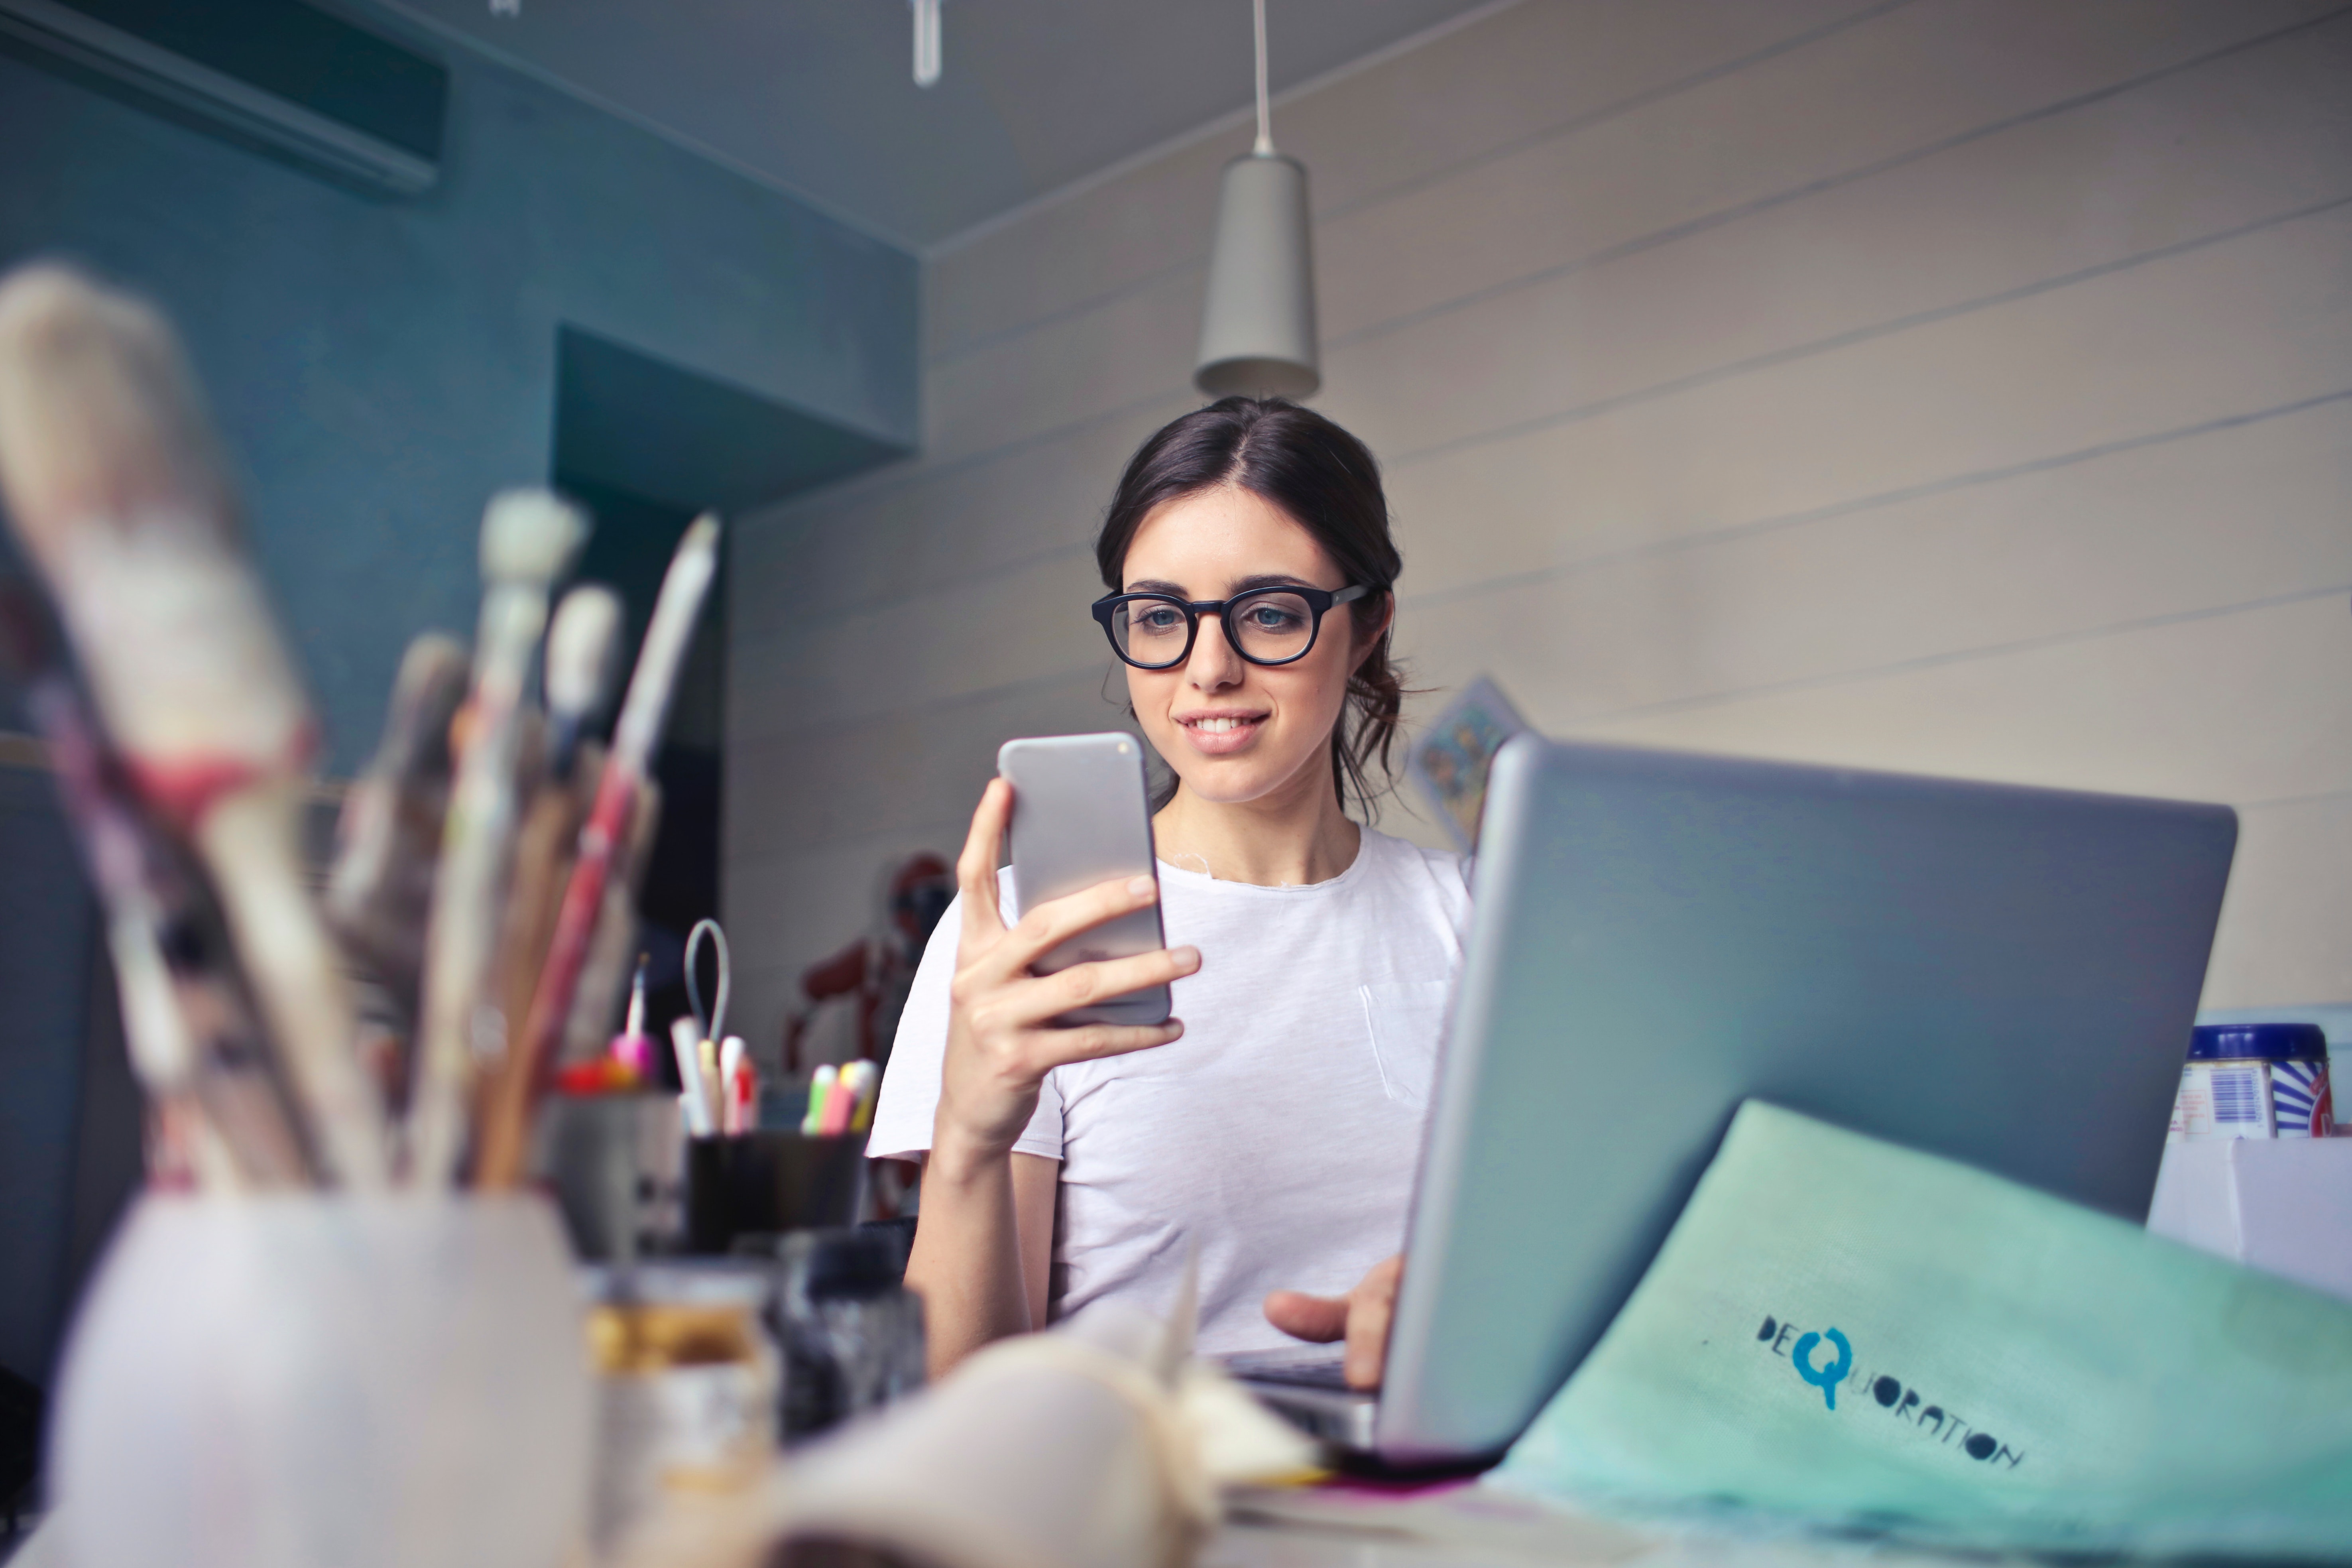 Woman in White T-shirt Holding Smartphone in Front of Laptop, Adult, Smartphone, Office, Paint, HQ Photo